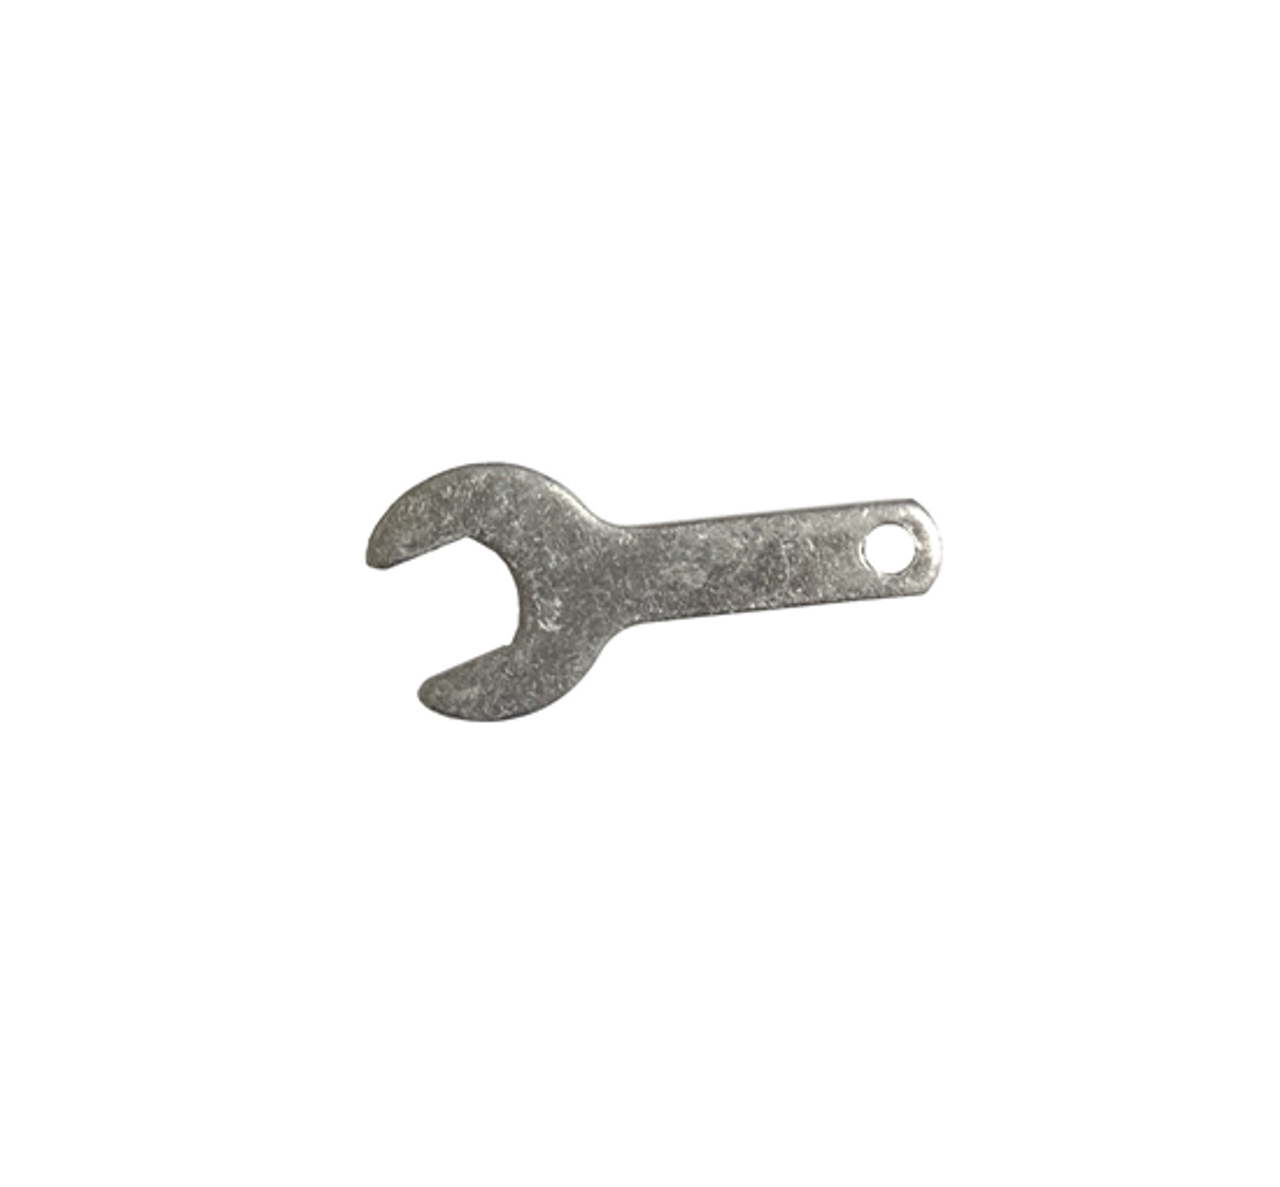 Vericom 7/16 Wrench Hex Coax Connector Tool